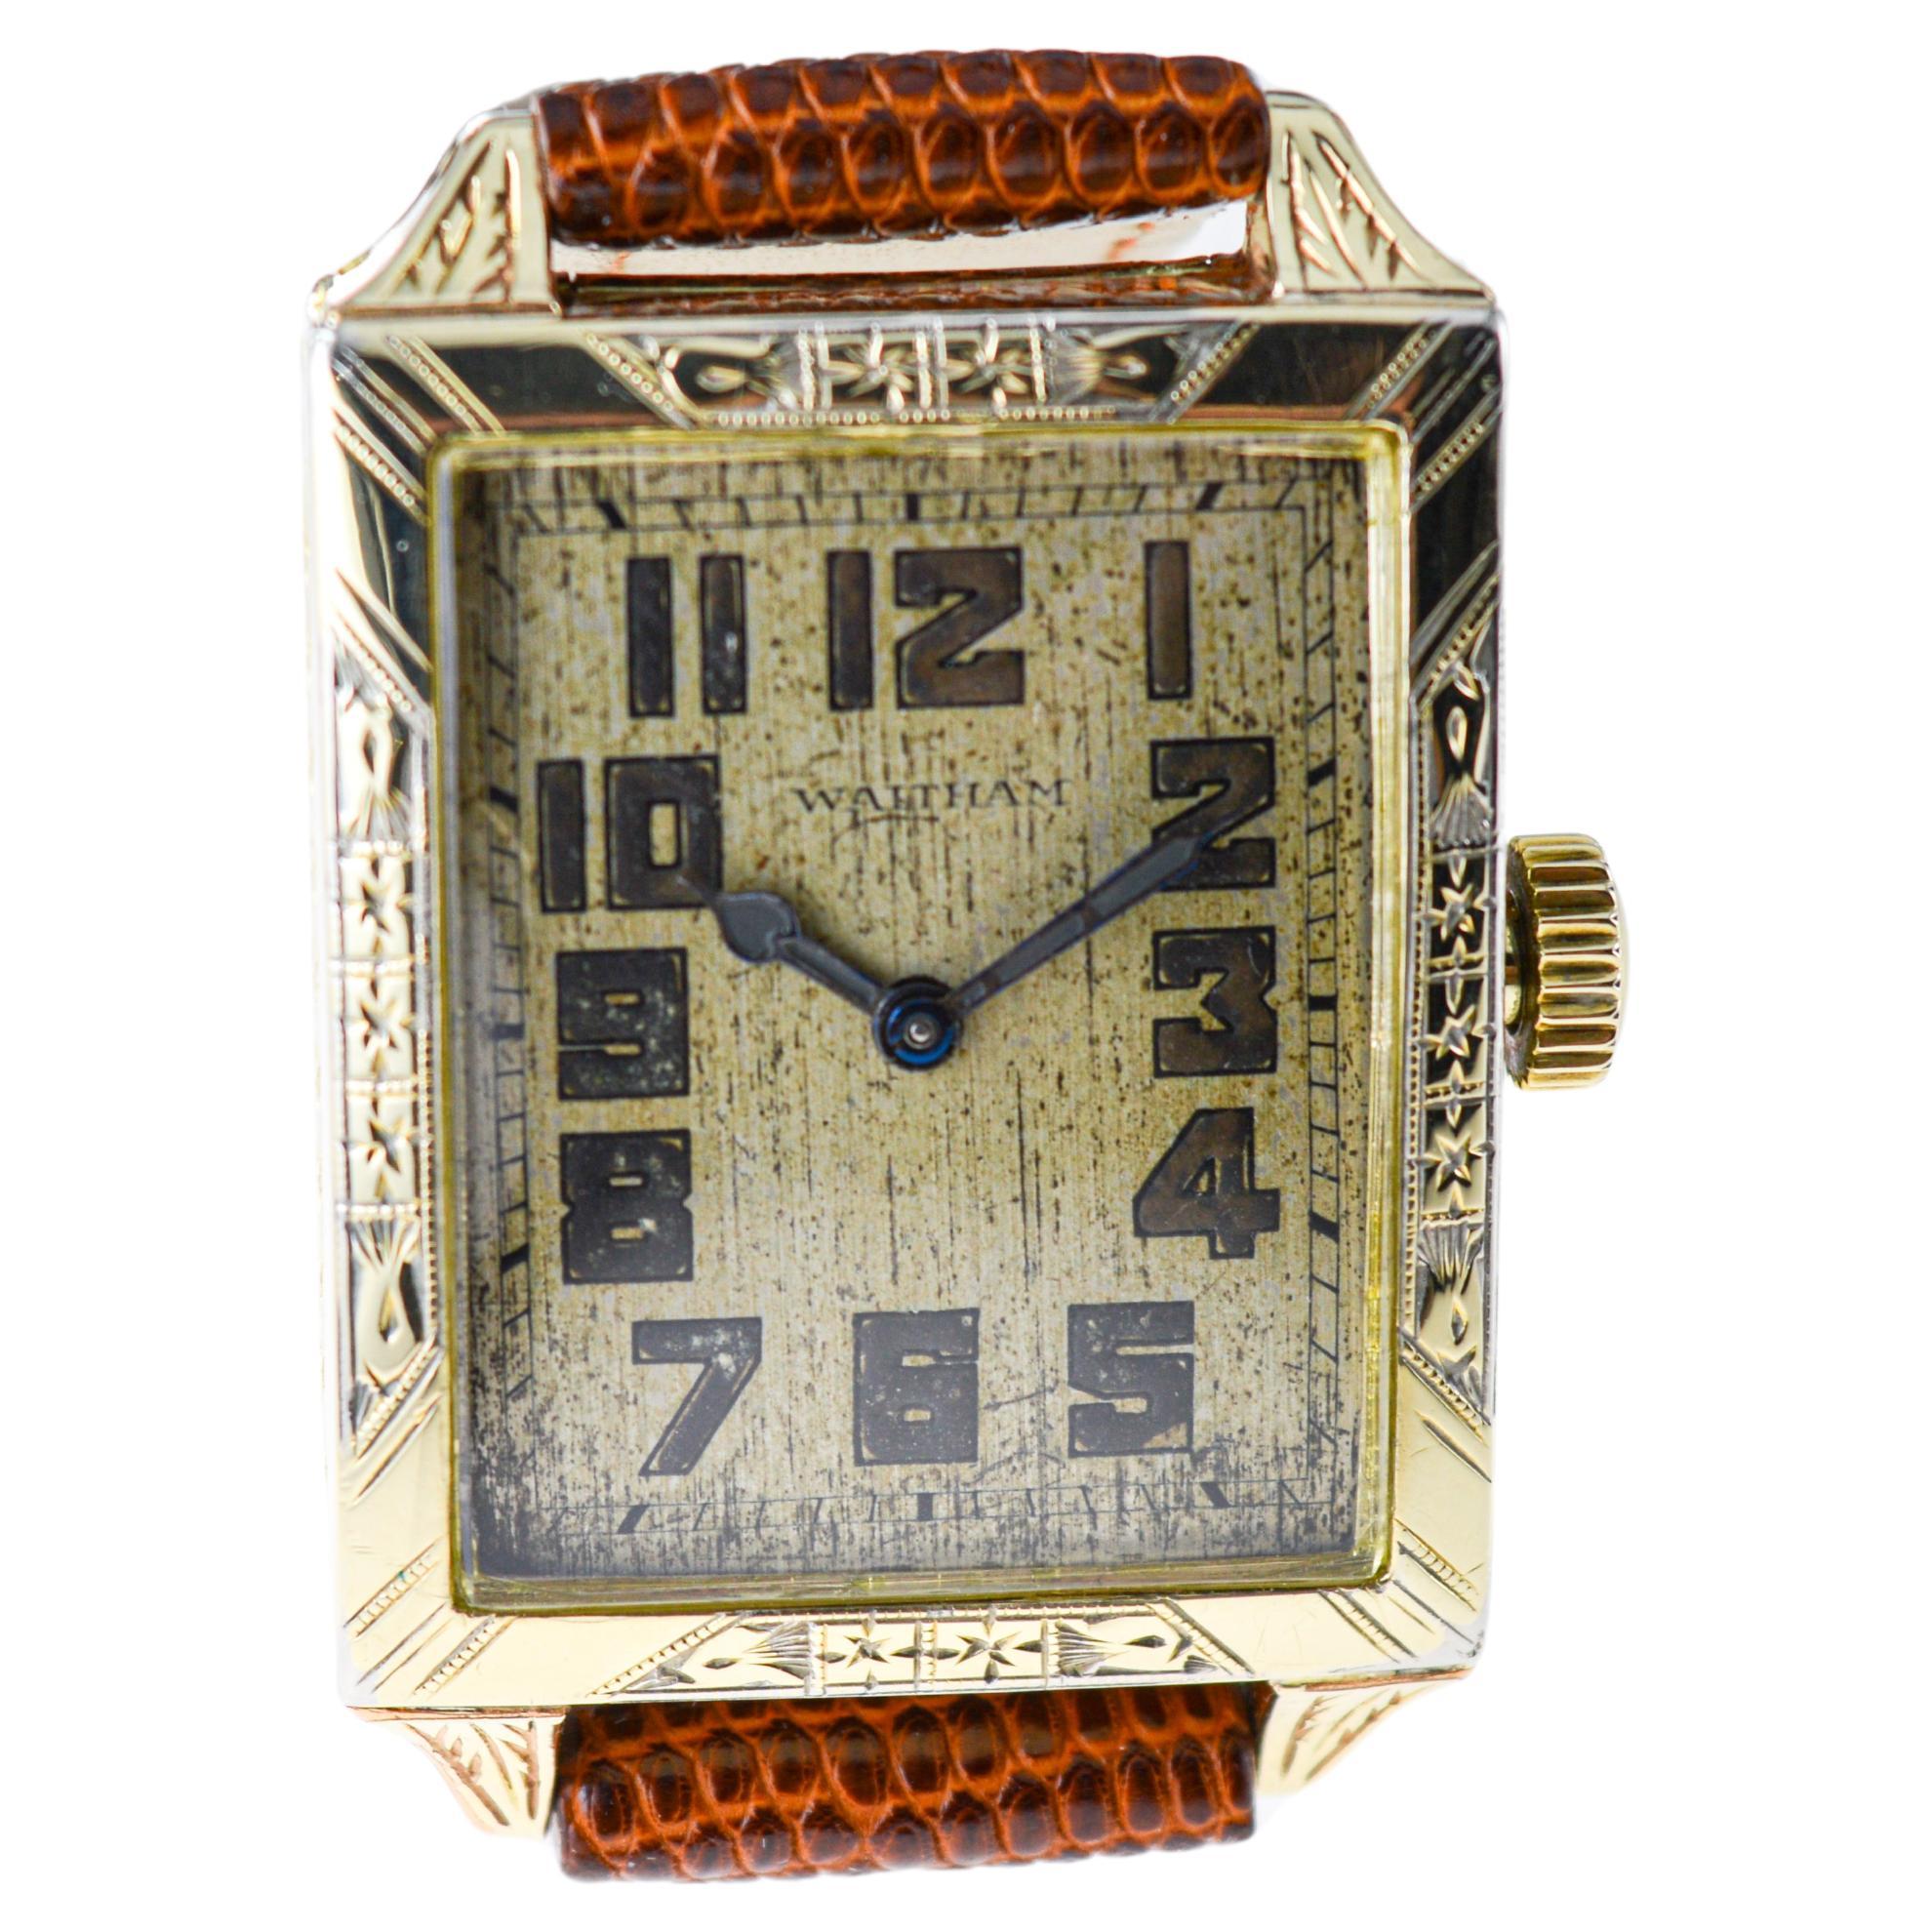 Waltham Yellow Gold Filled Art Deco Watch with Original Dial from 1926 For Sale 5